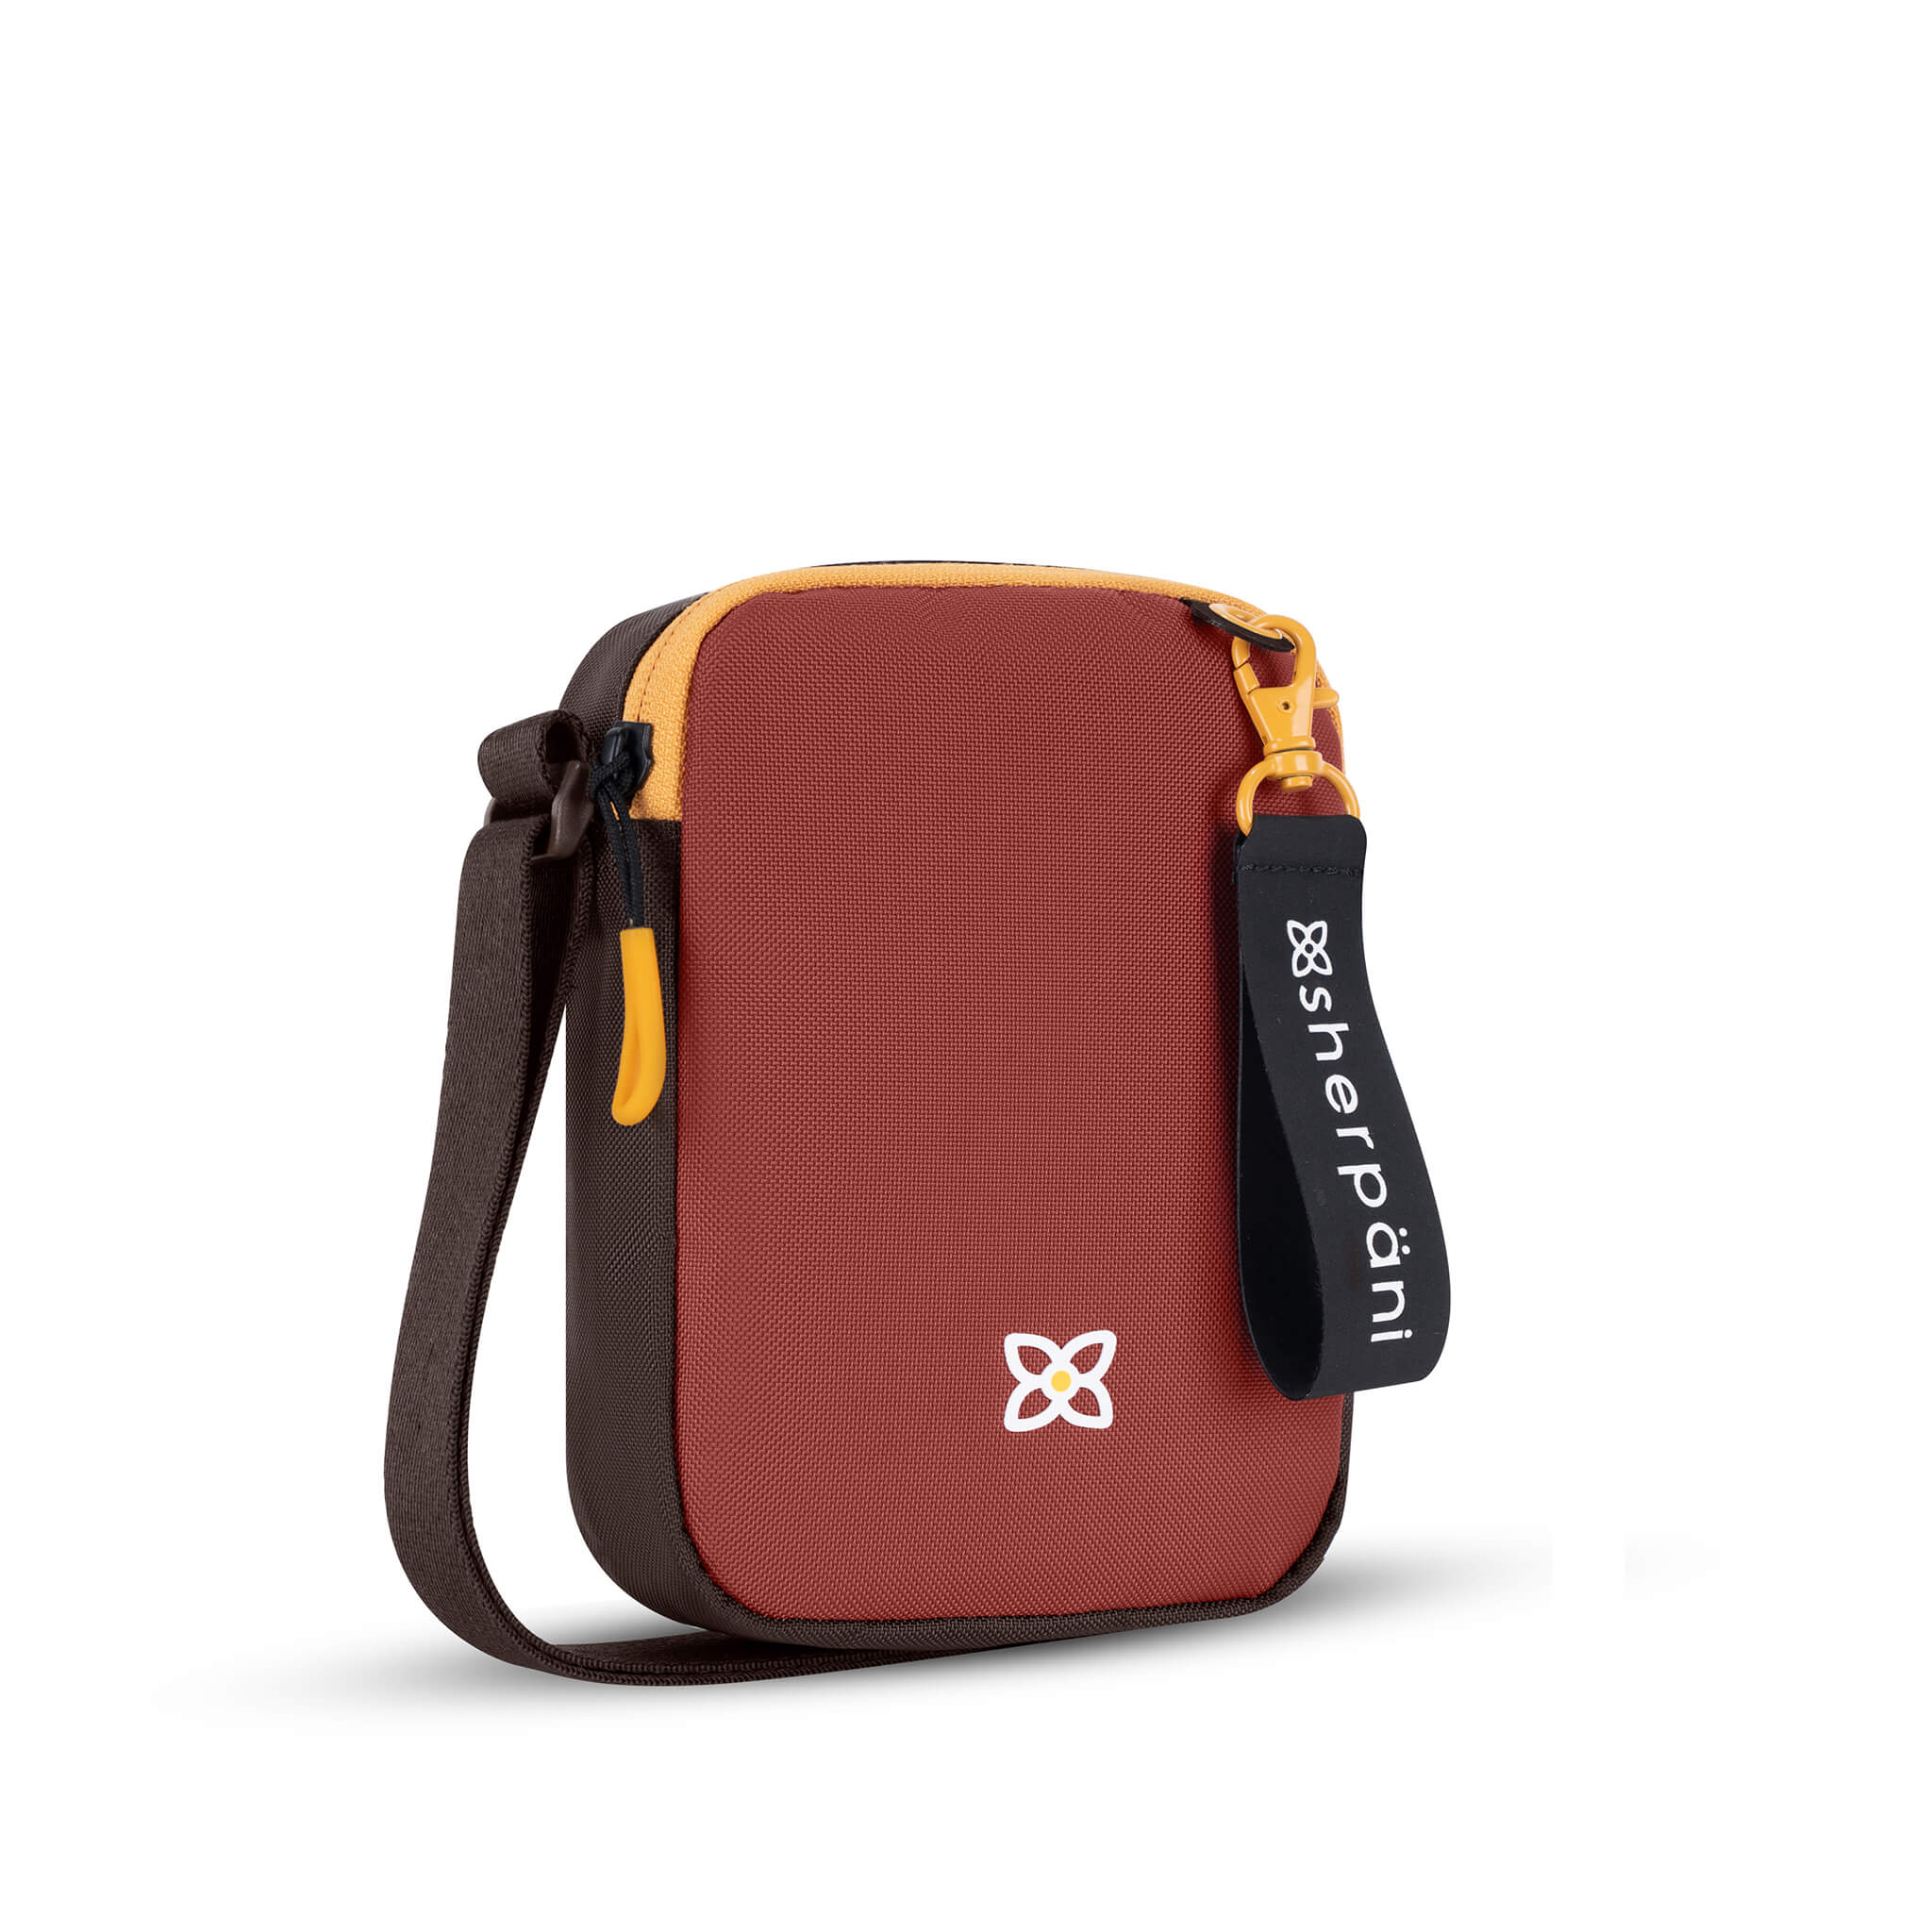 Angled front view of Sherpani mini crossbody purse, the Rogue in Cider. Rogue features include an adjustable crossbody strap, detachable keychain, compact design, minimalist bag and RFID protection. The Cider color is two-toned in burgundy and dark brown with yellow accents.